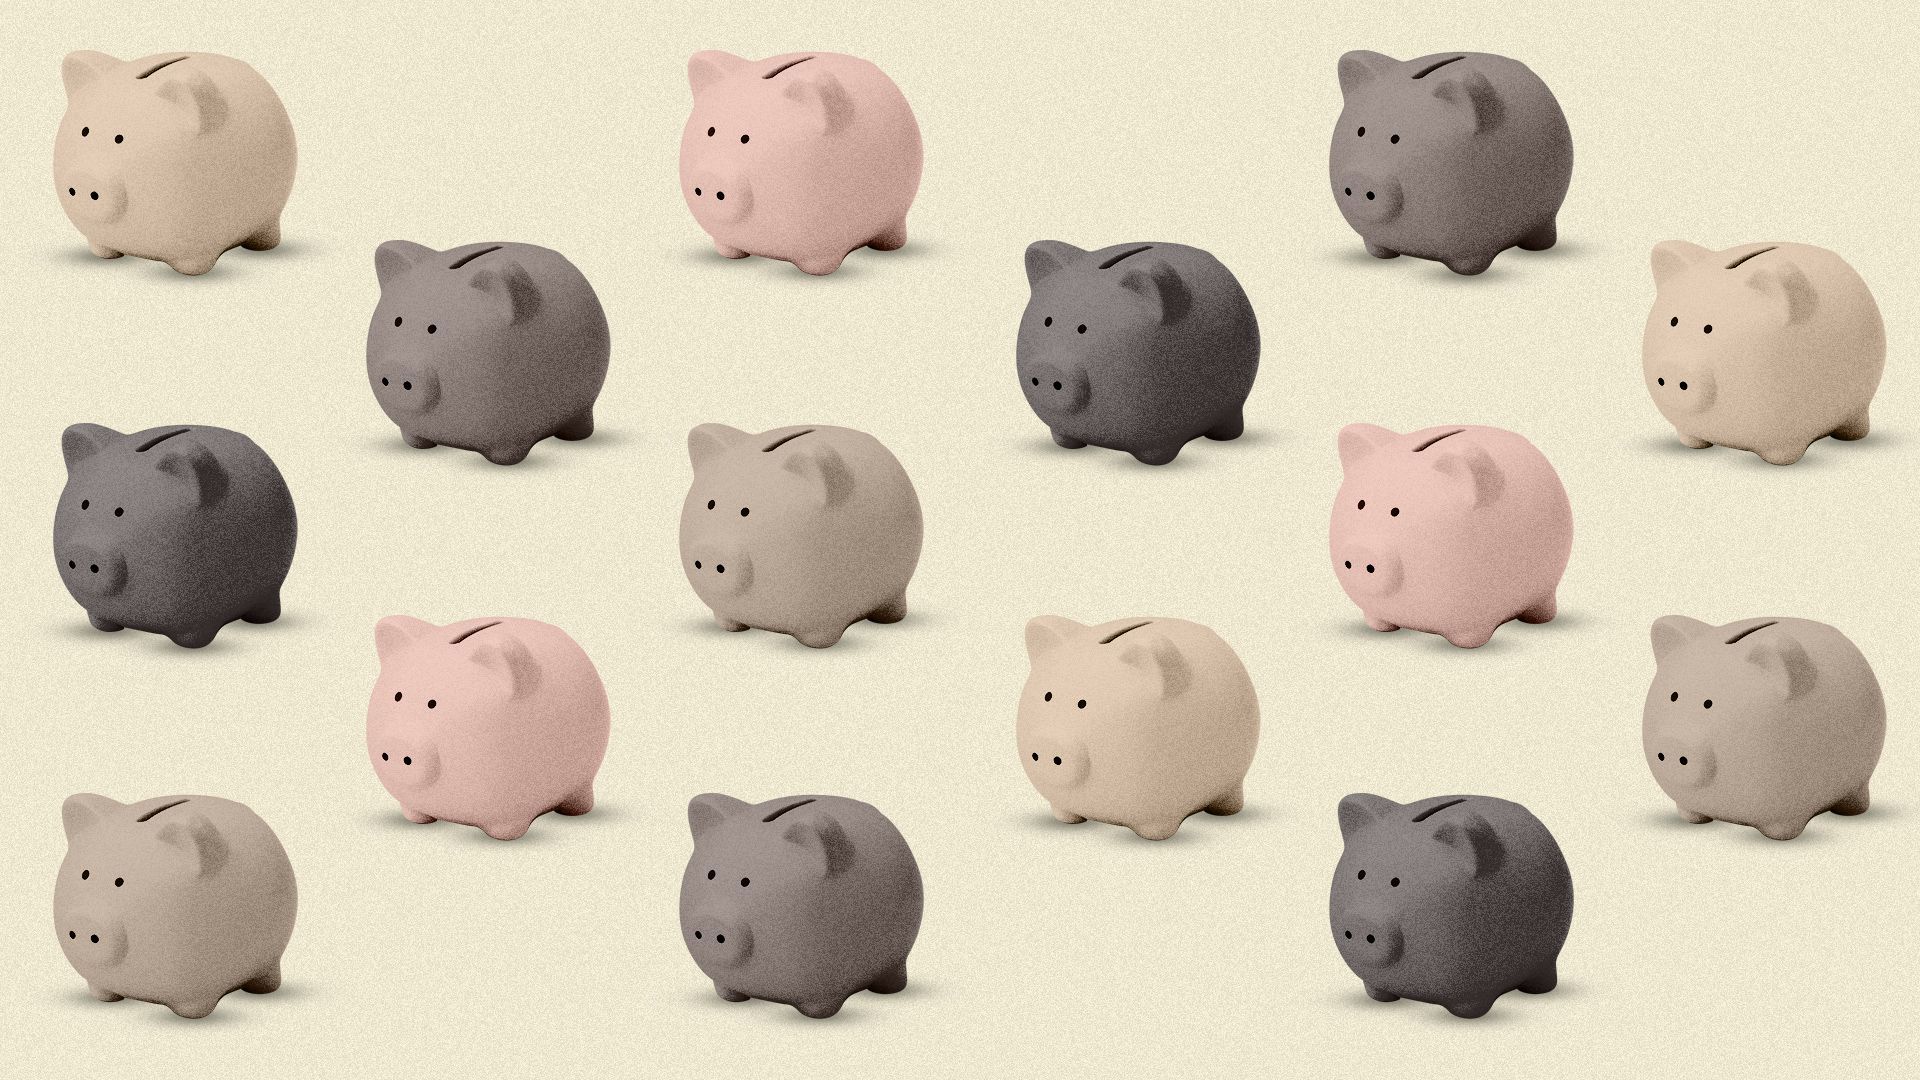 Illustration of a pattern of piggy banks in various shades of pink and brown.  